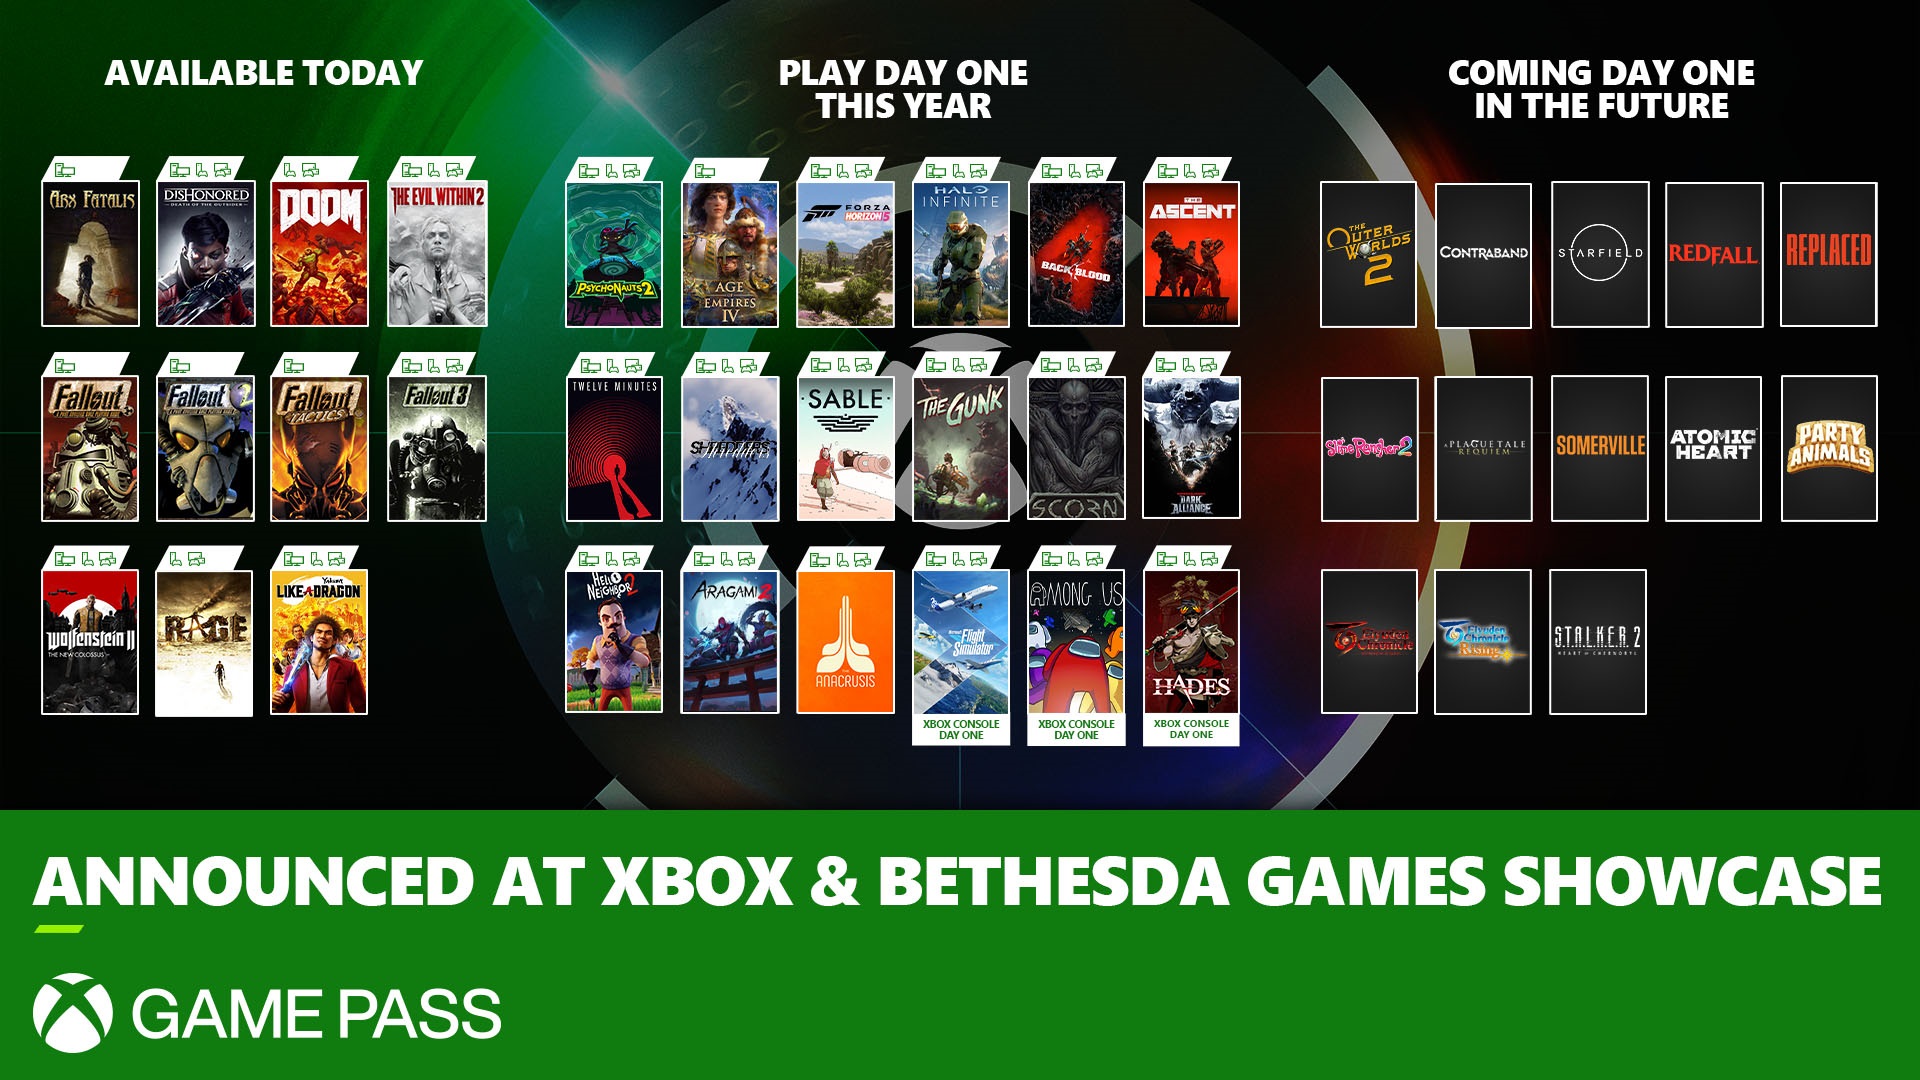 More Bethesda games are coming to Xbox Game Pass